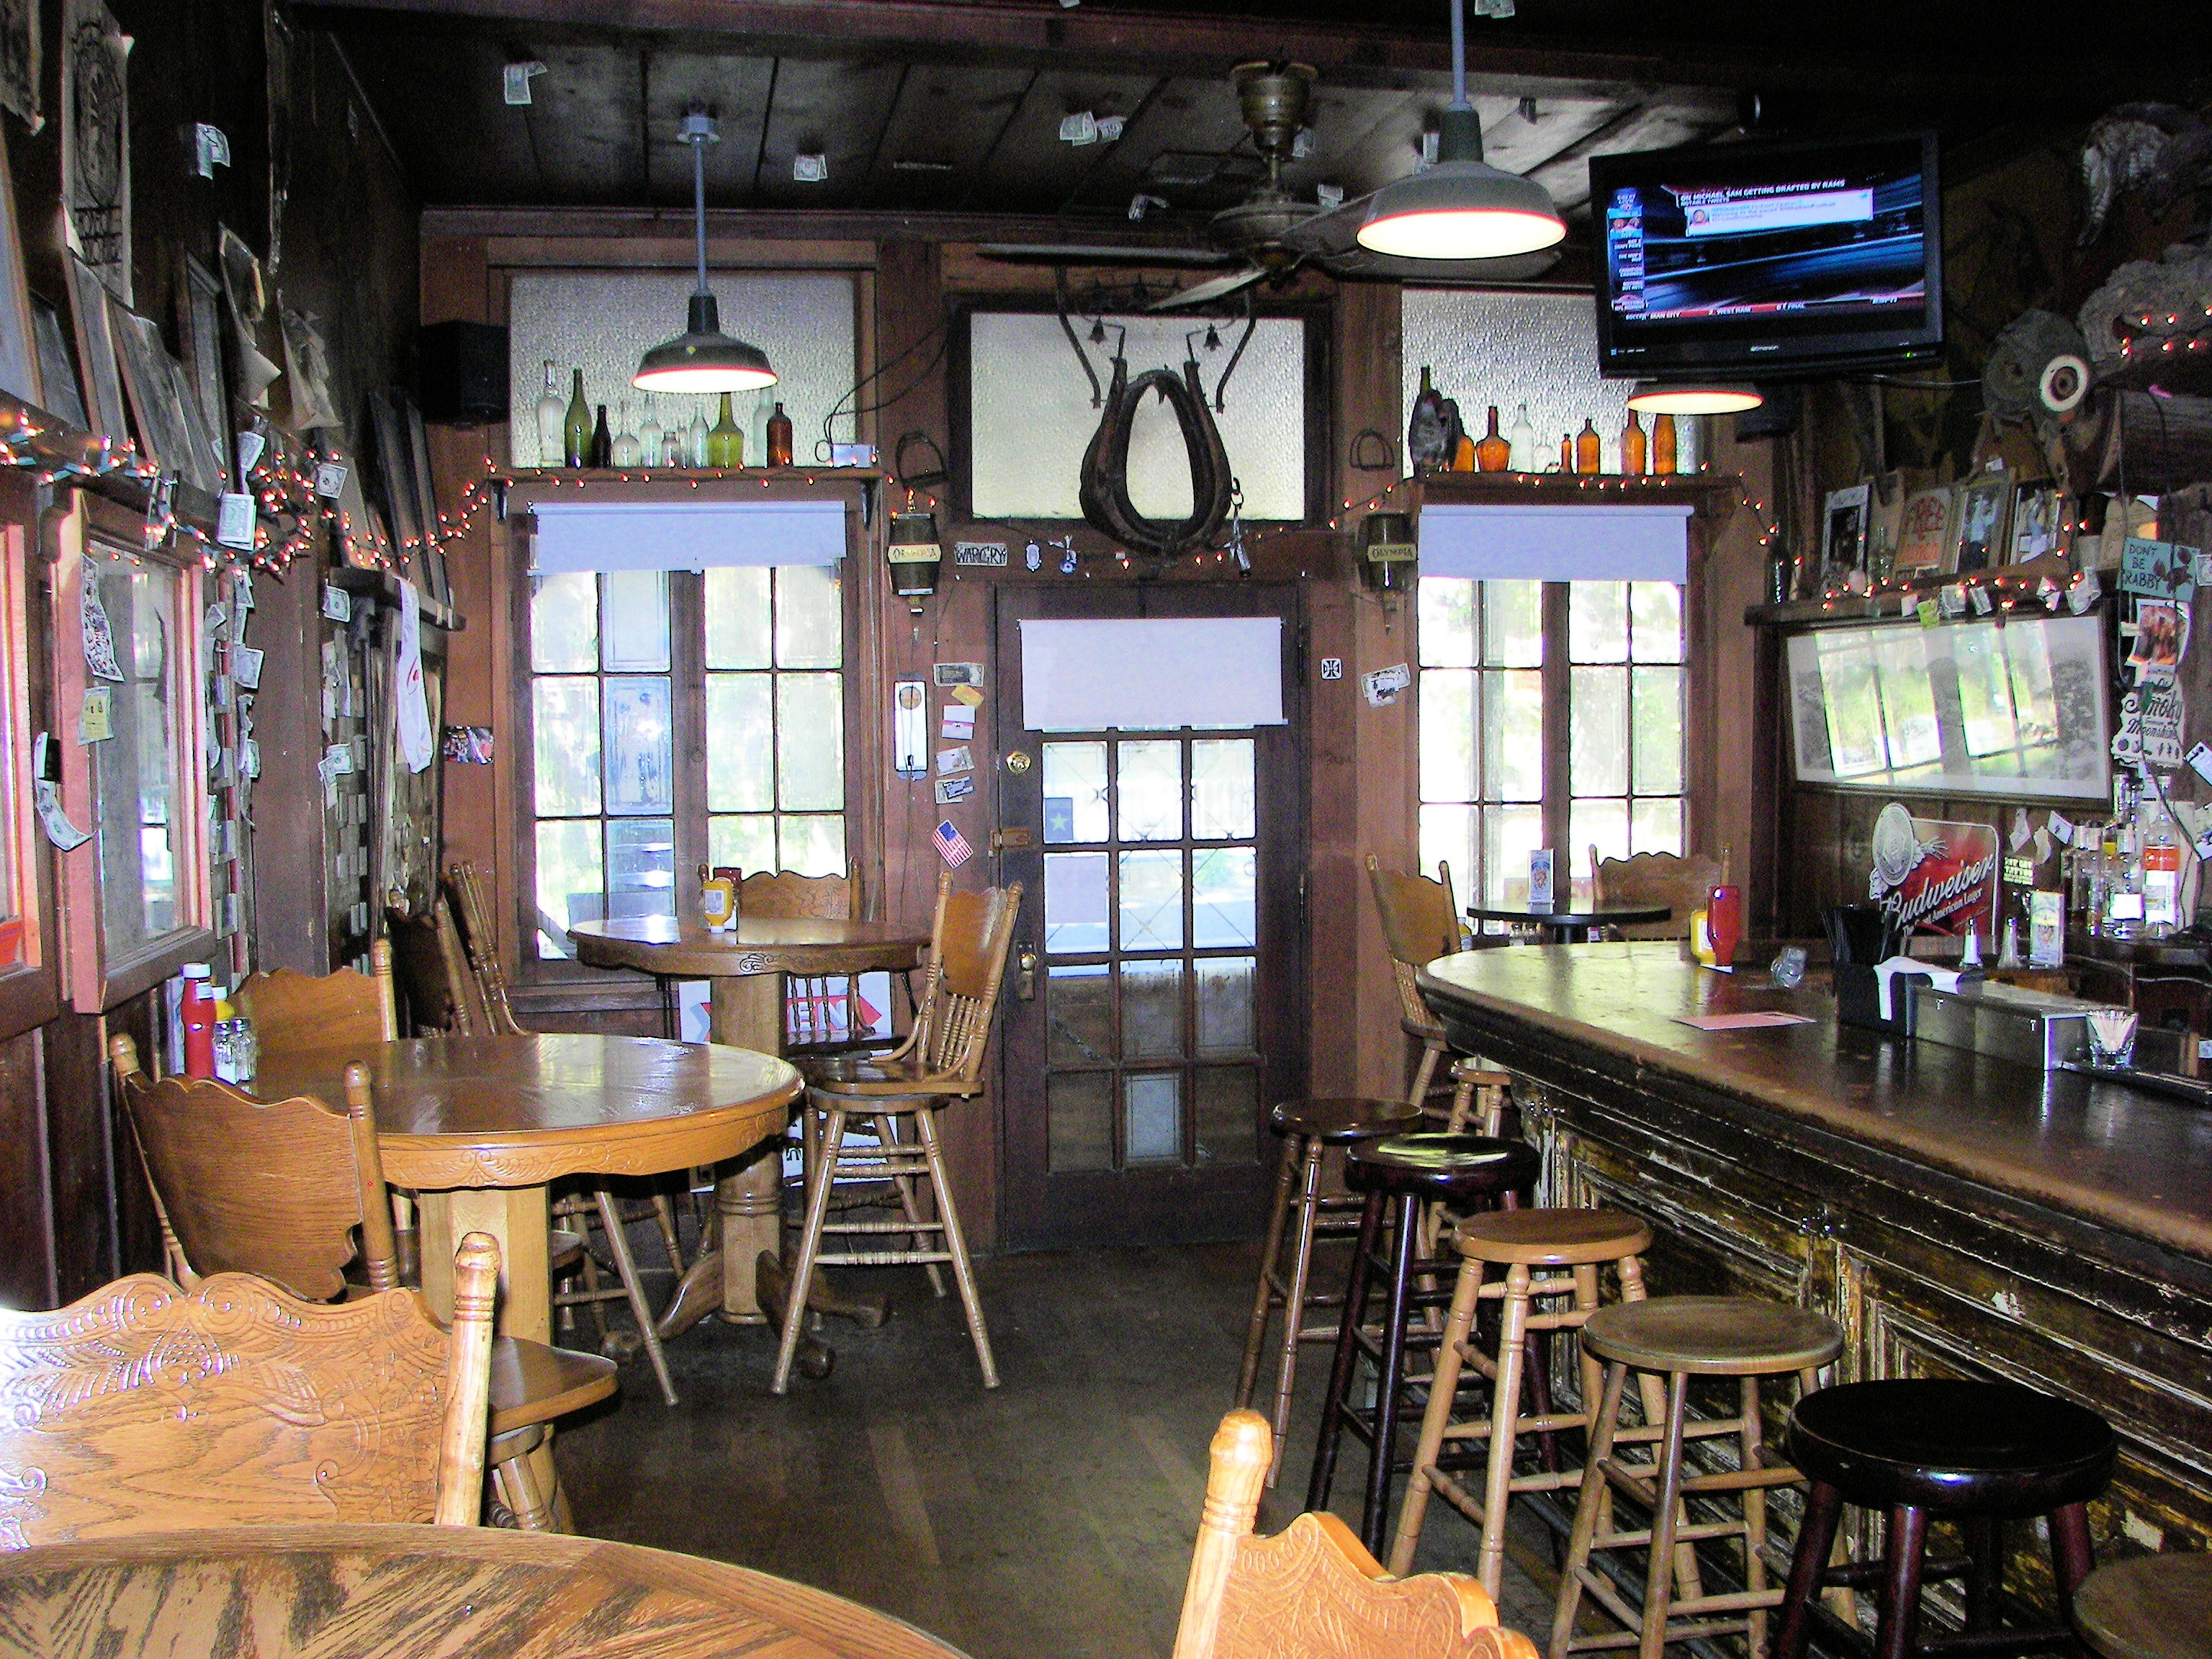 Inside The Whiskey Flat Saloon